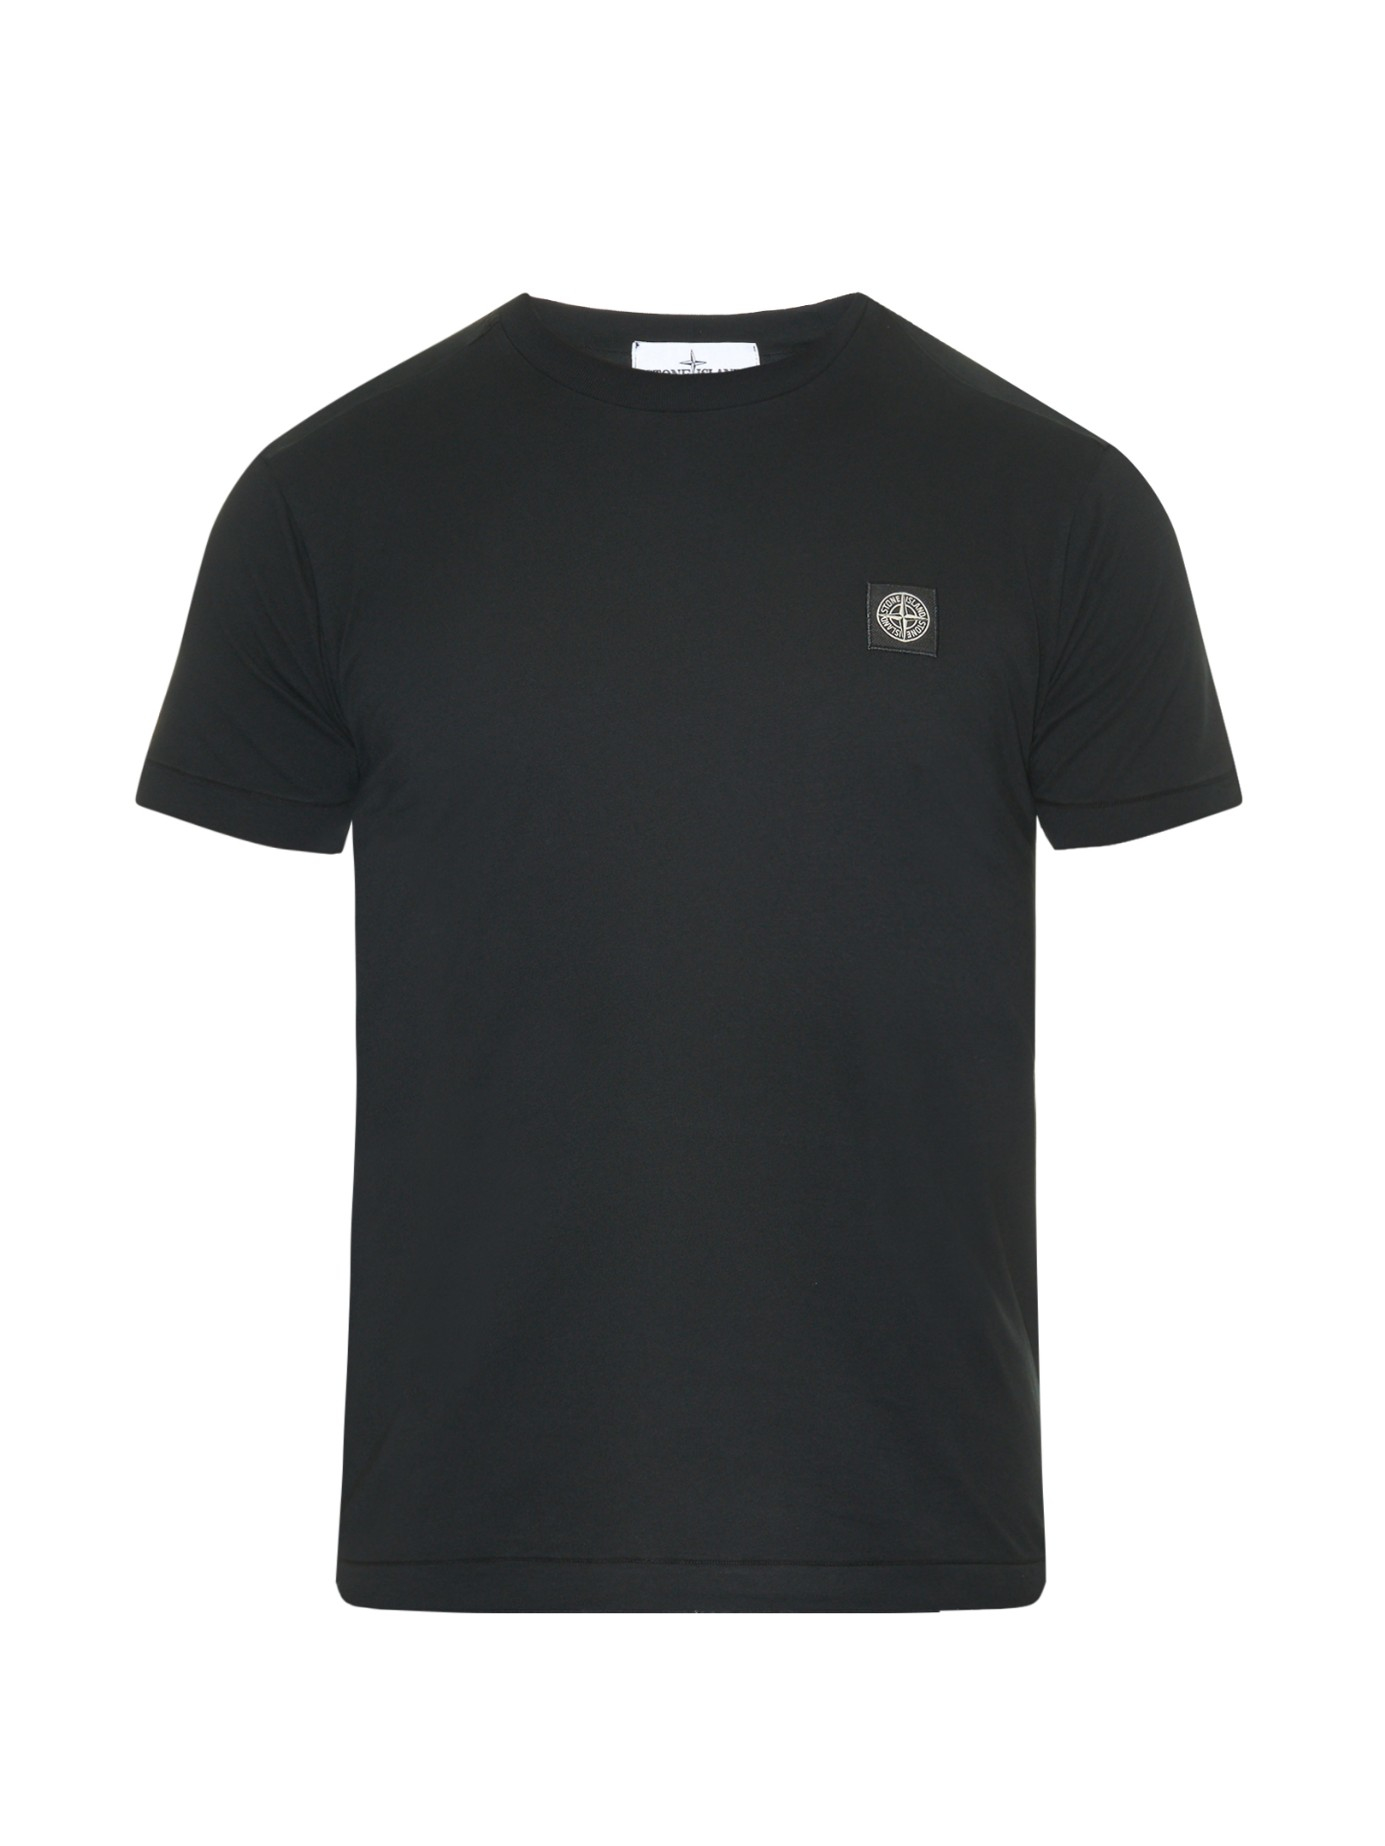 Lyst - Stone island Logo-Patch Jersey T-Shirt in Black for Men